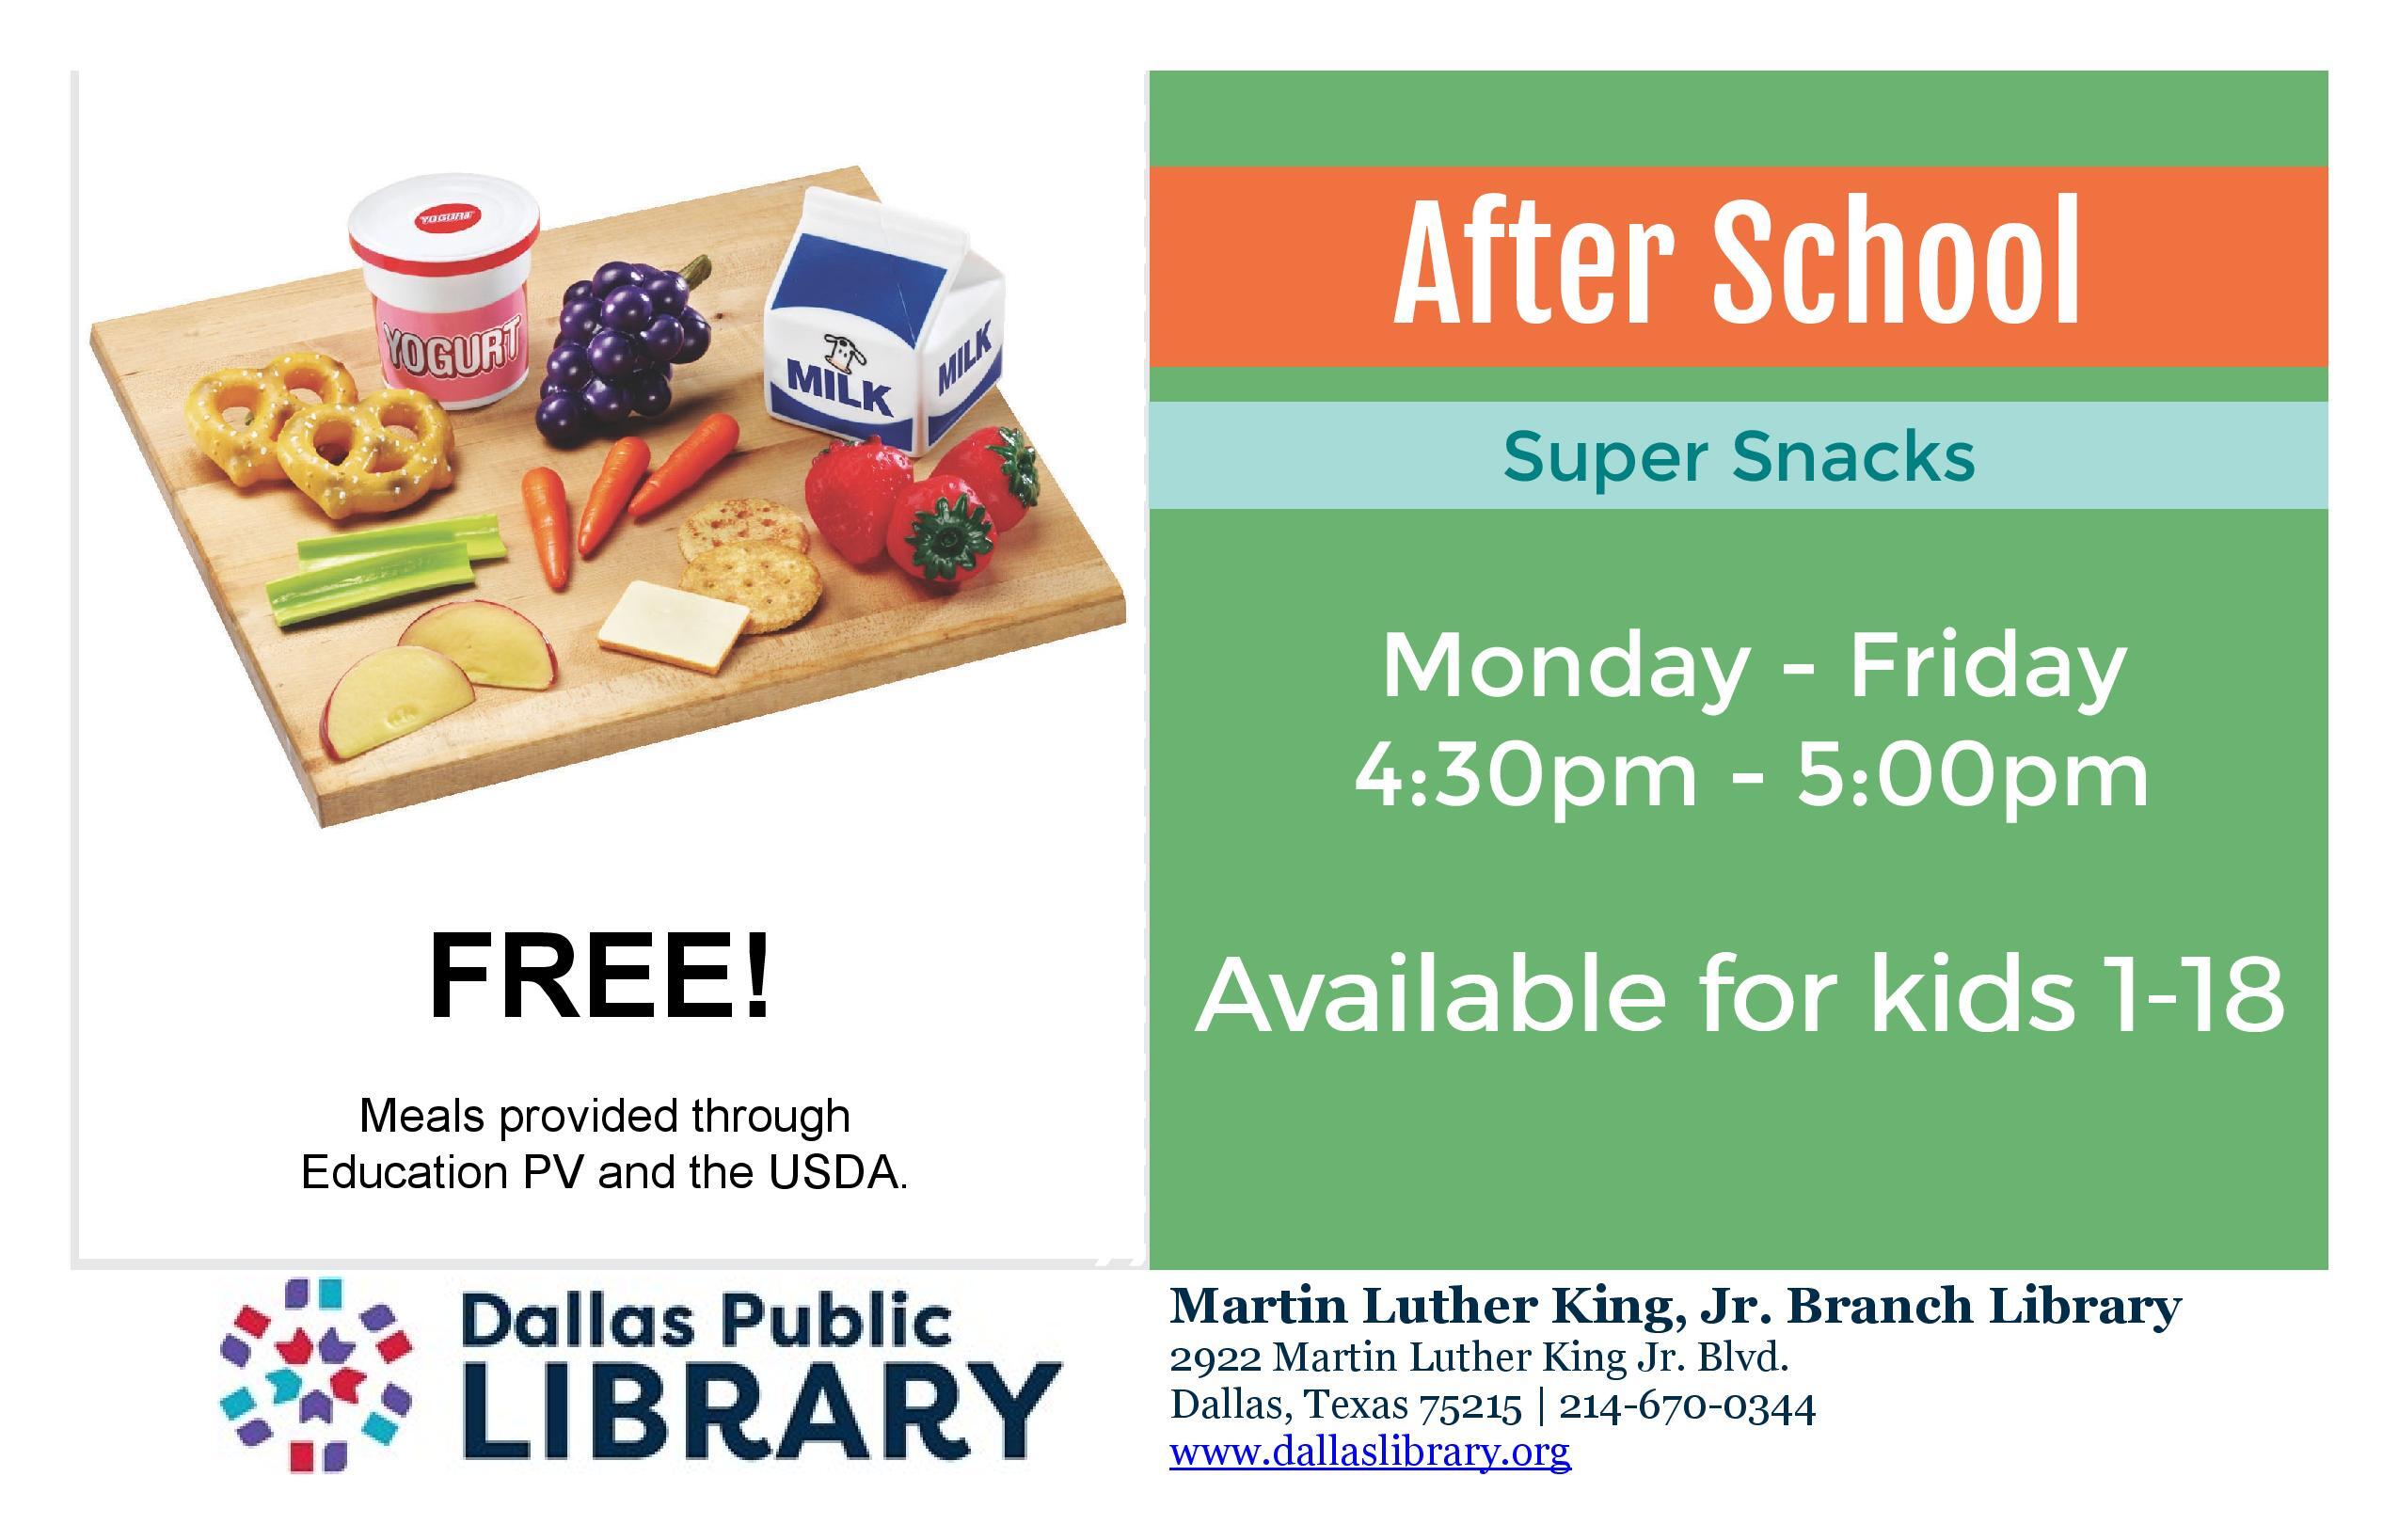 After School Super Snacks (For Kids 1-18yrs) @ MLK Branch Library